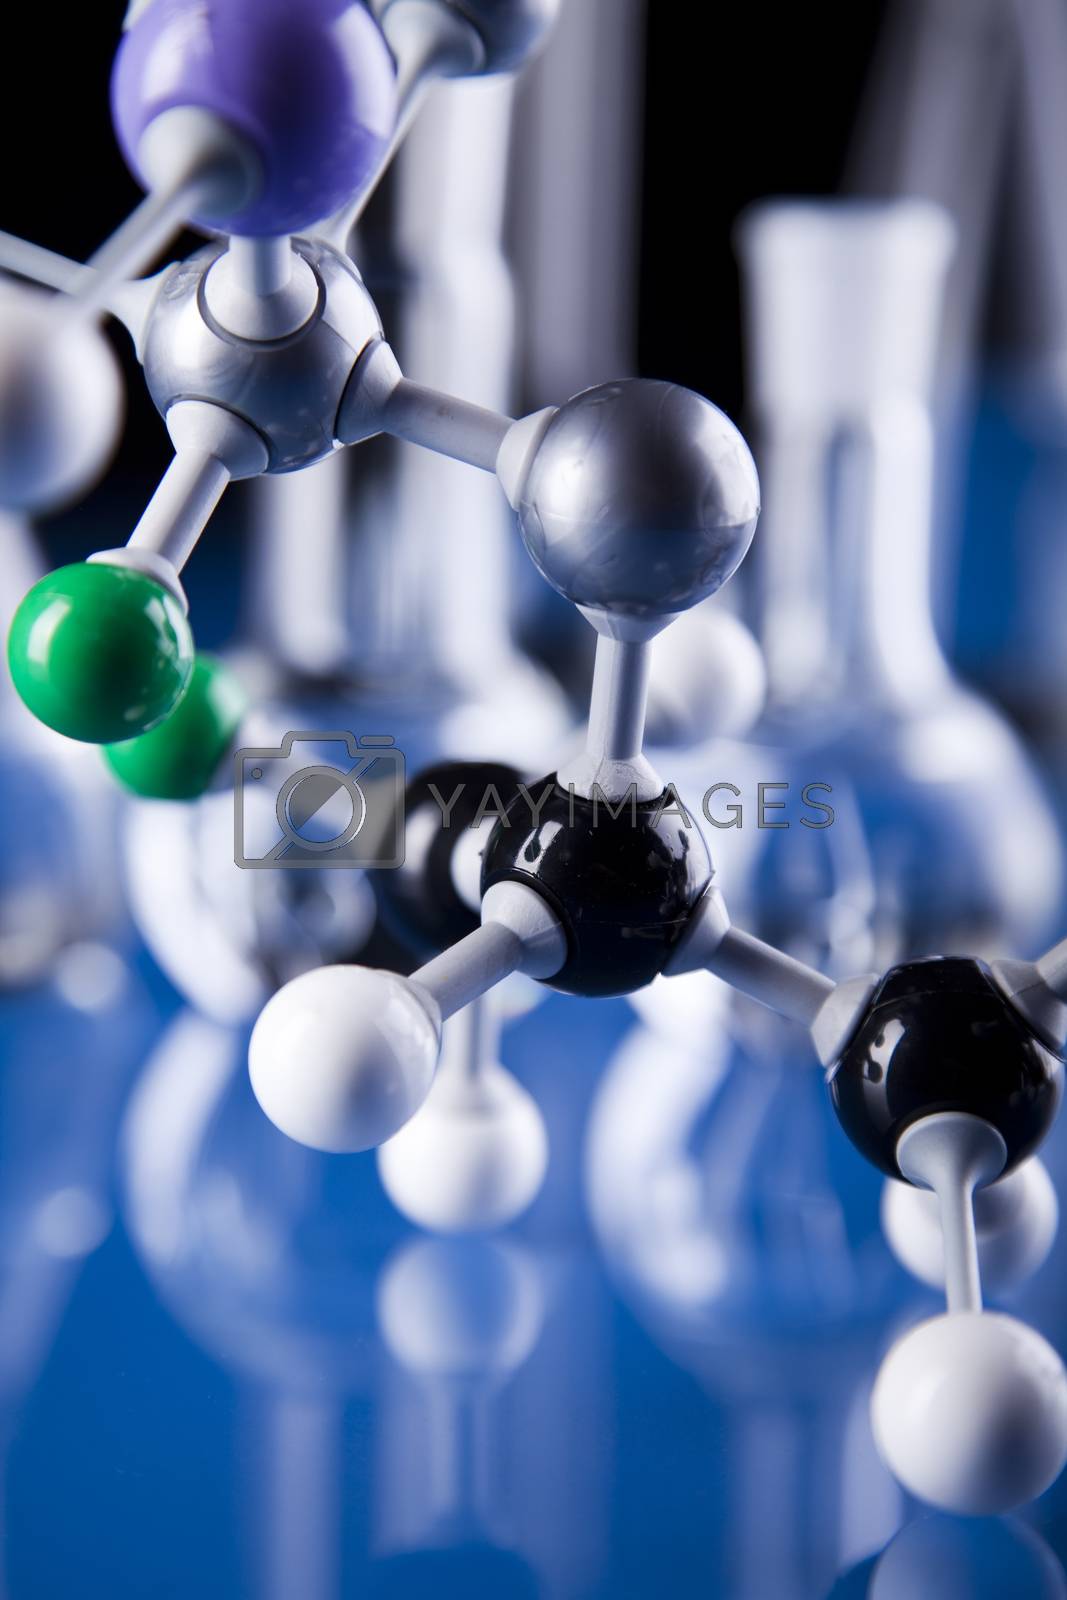 Royalty free image of Chemistry on background, bright modern chemical concept by JanPietruszka